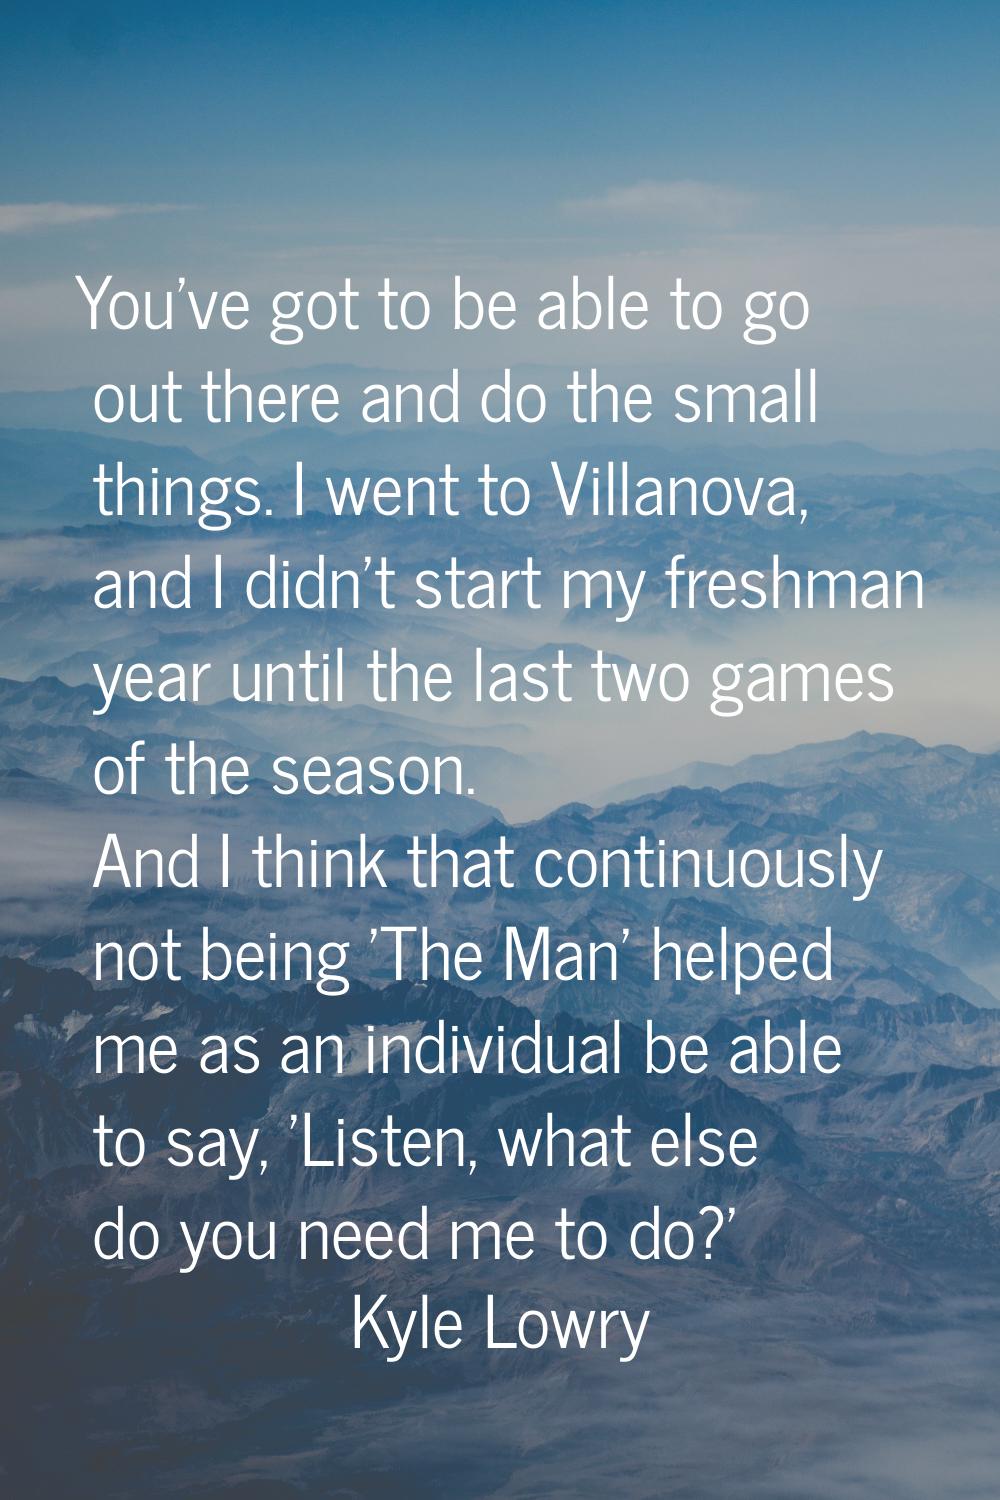 You've got to be able to go out there and do the small things. I went to Villanova, and I didn't st